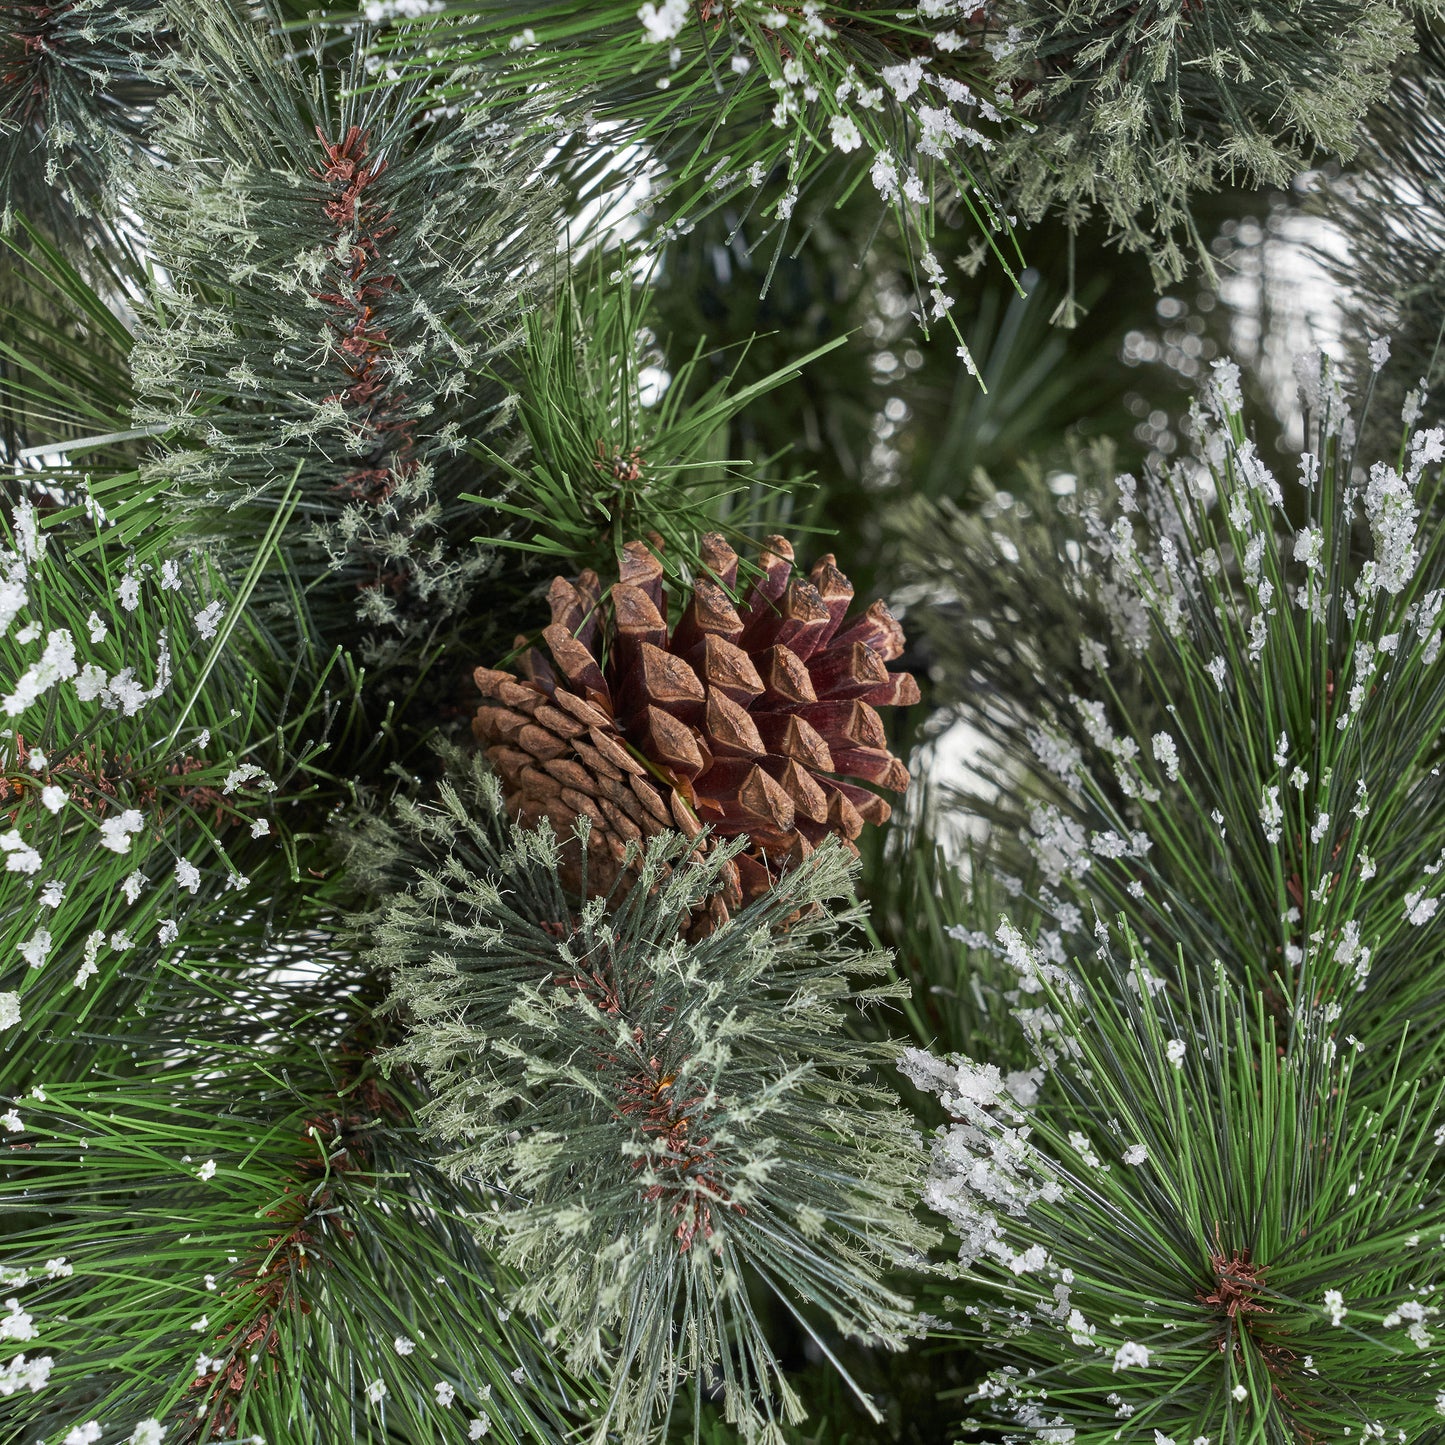 7-foot Cashmere Pine and Mixed Needles Hinged Artificial Christmas Tree with Snowy Branches and Pinecones